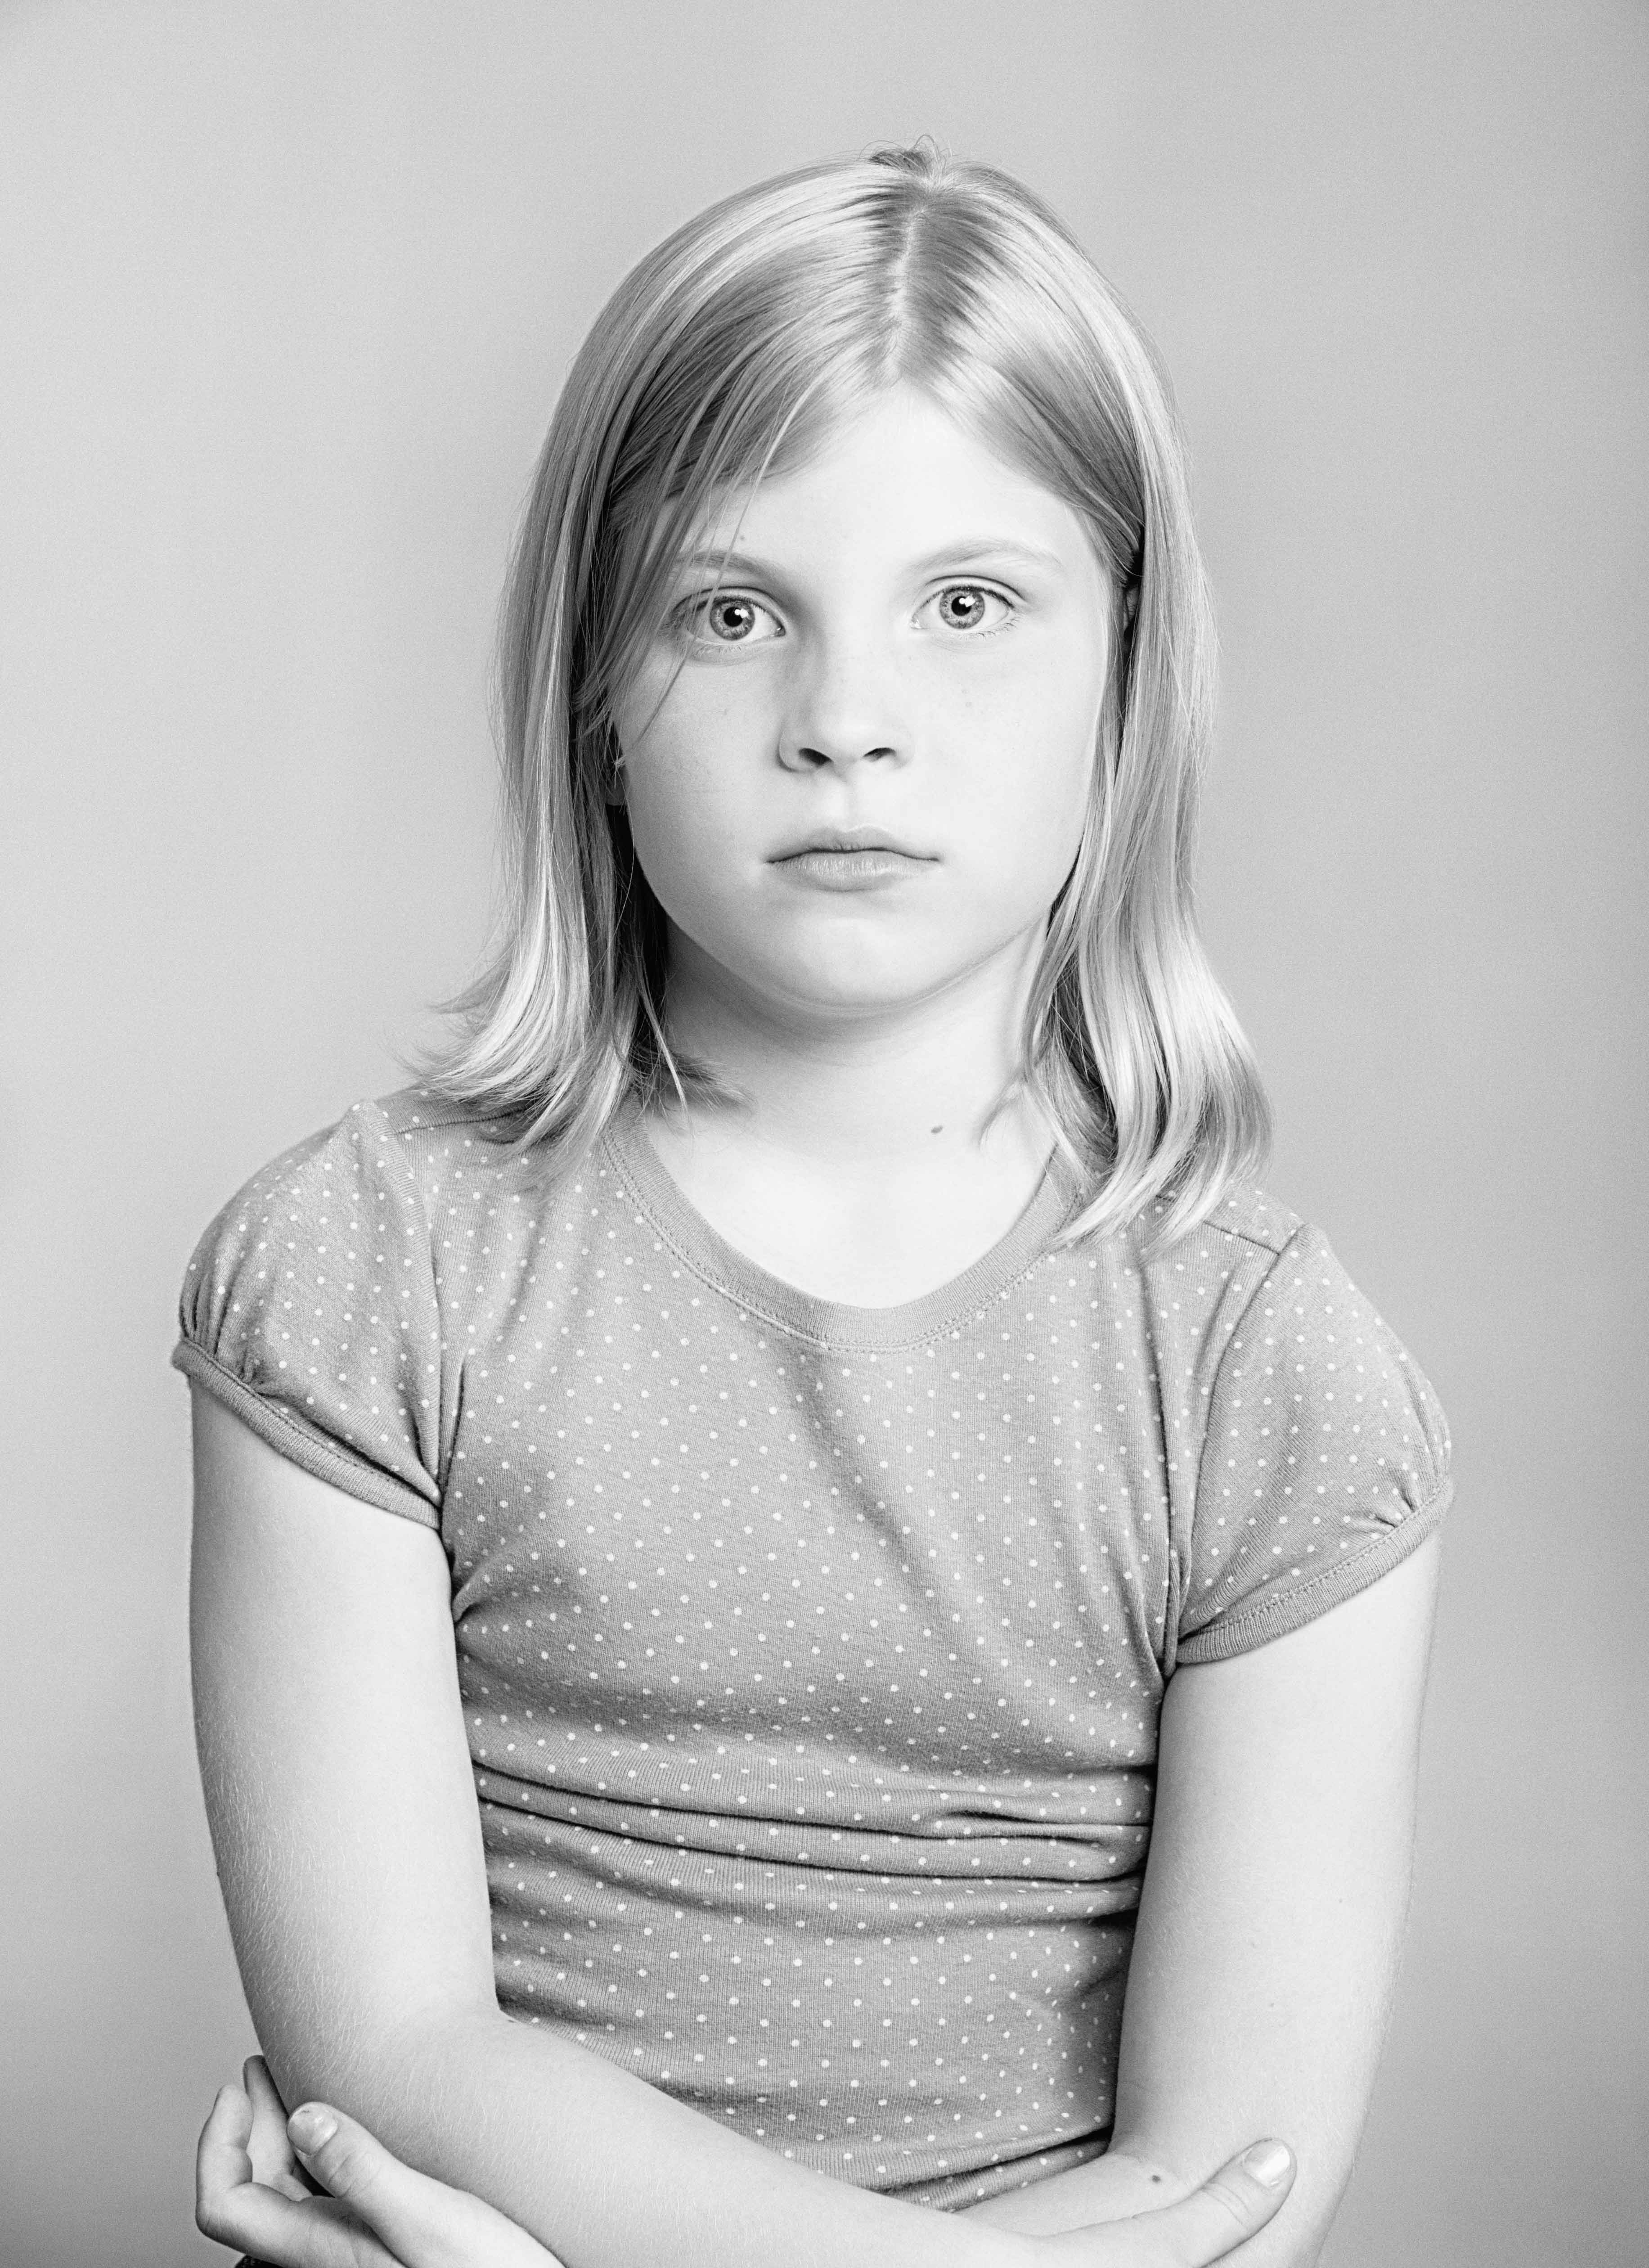  close up photography portrait of a young girl in black and white on a white background